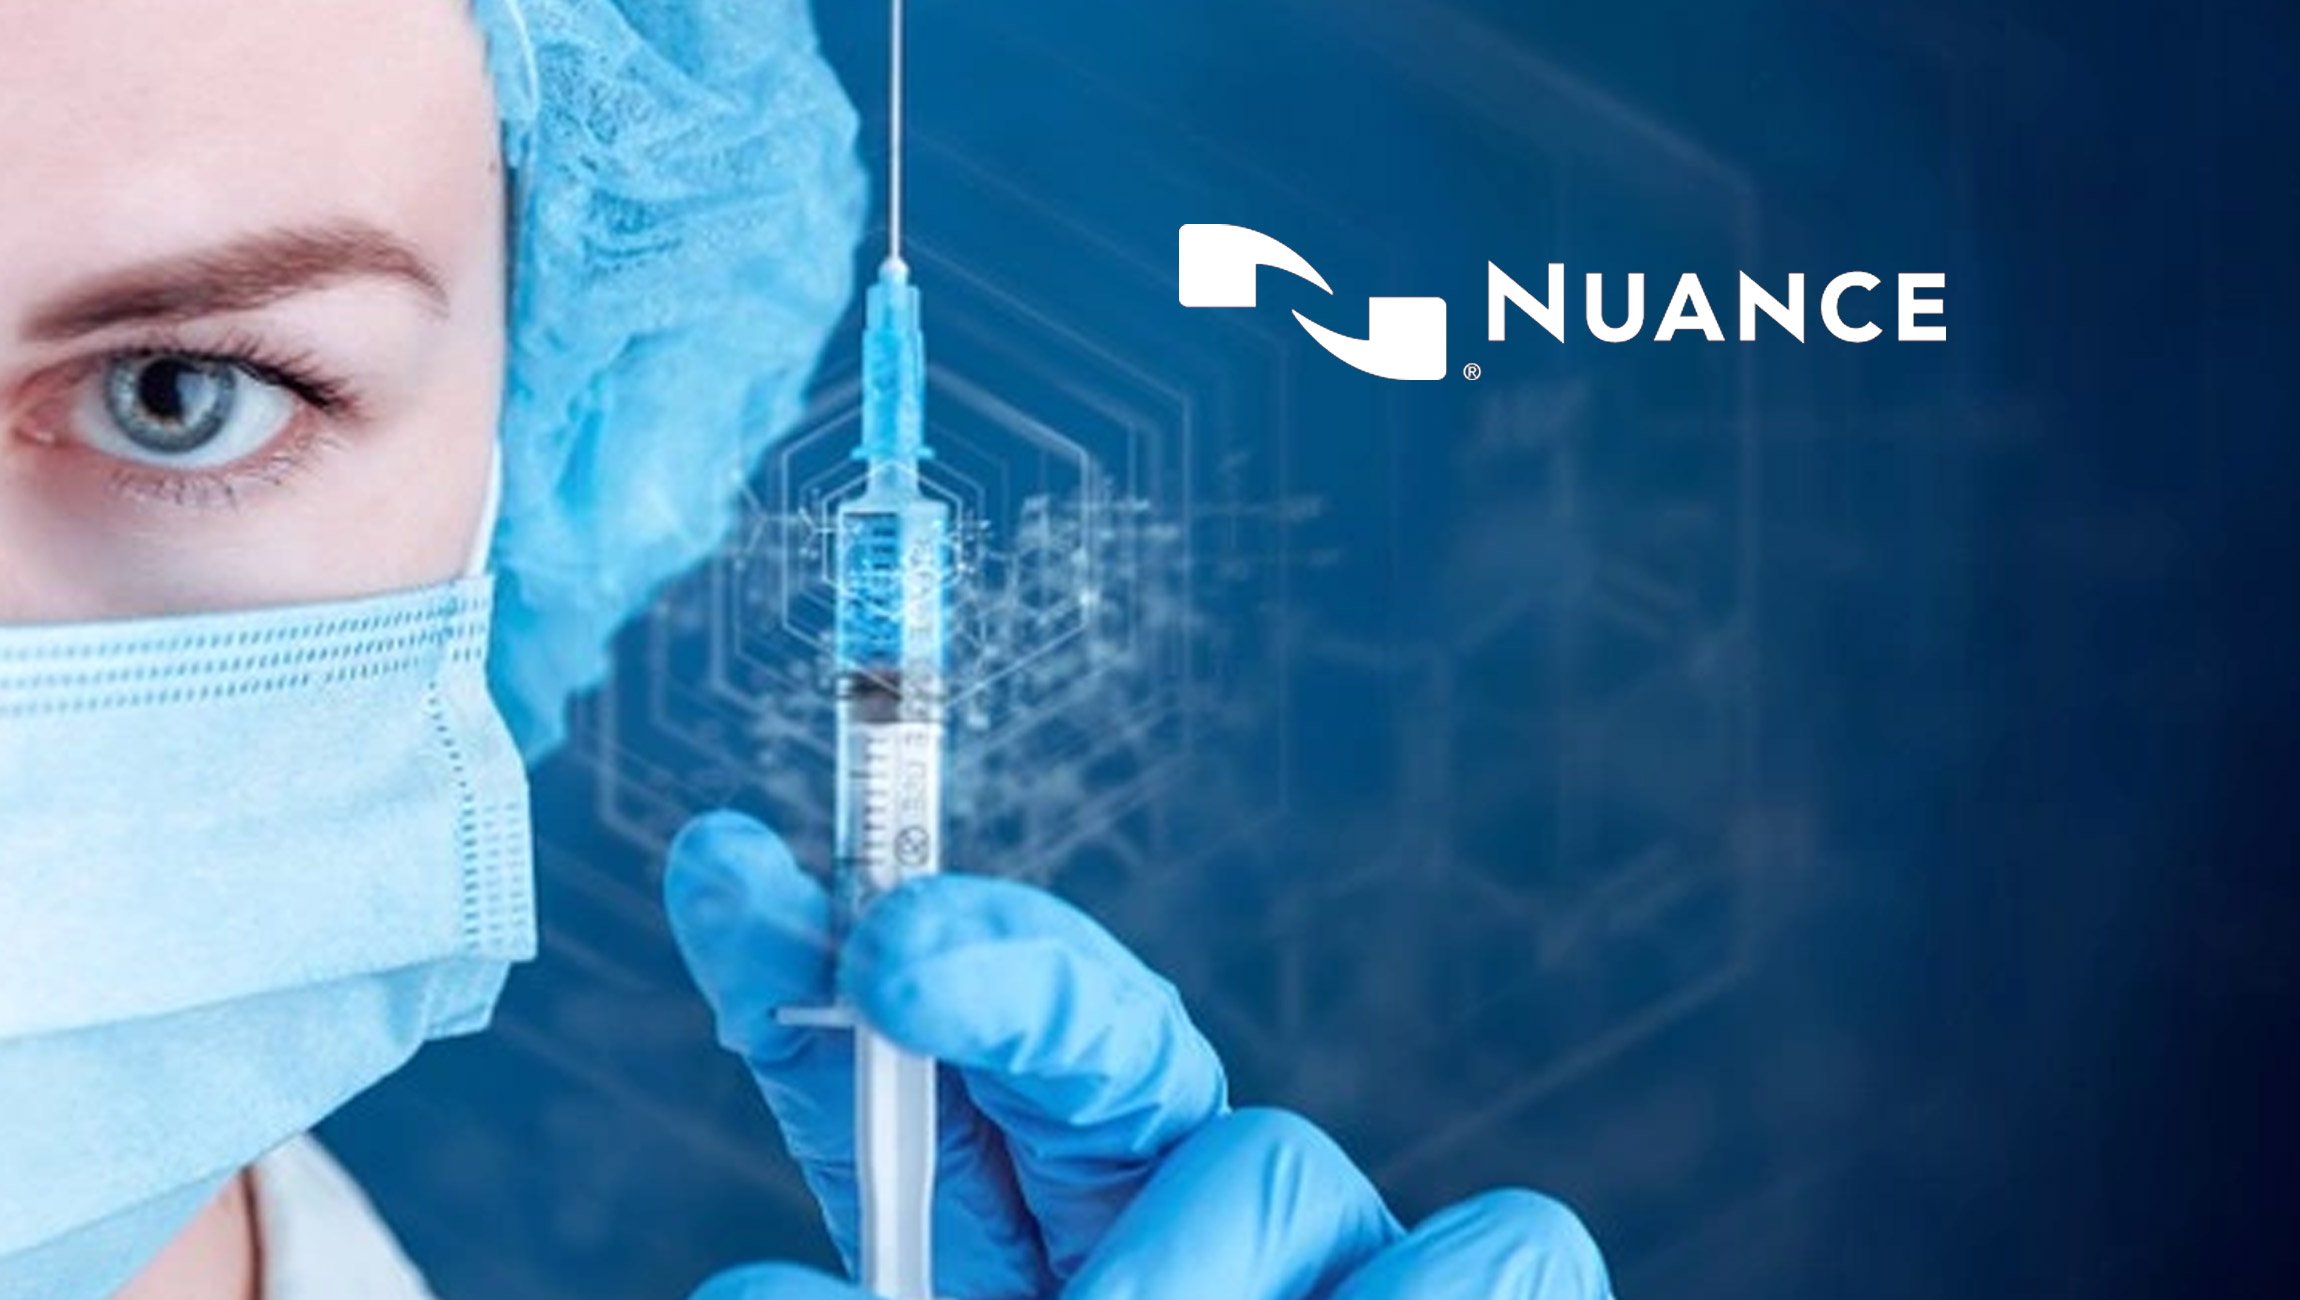 Walgreens Enlists Nuance's AI-Powered Intelligent Engagement Solutions to Help Customers Schedule COVID Vaccine Appointments